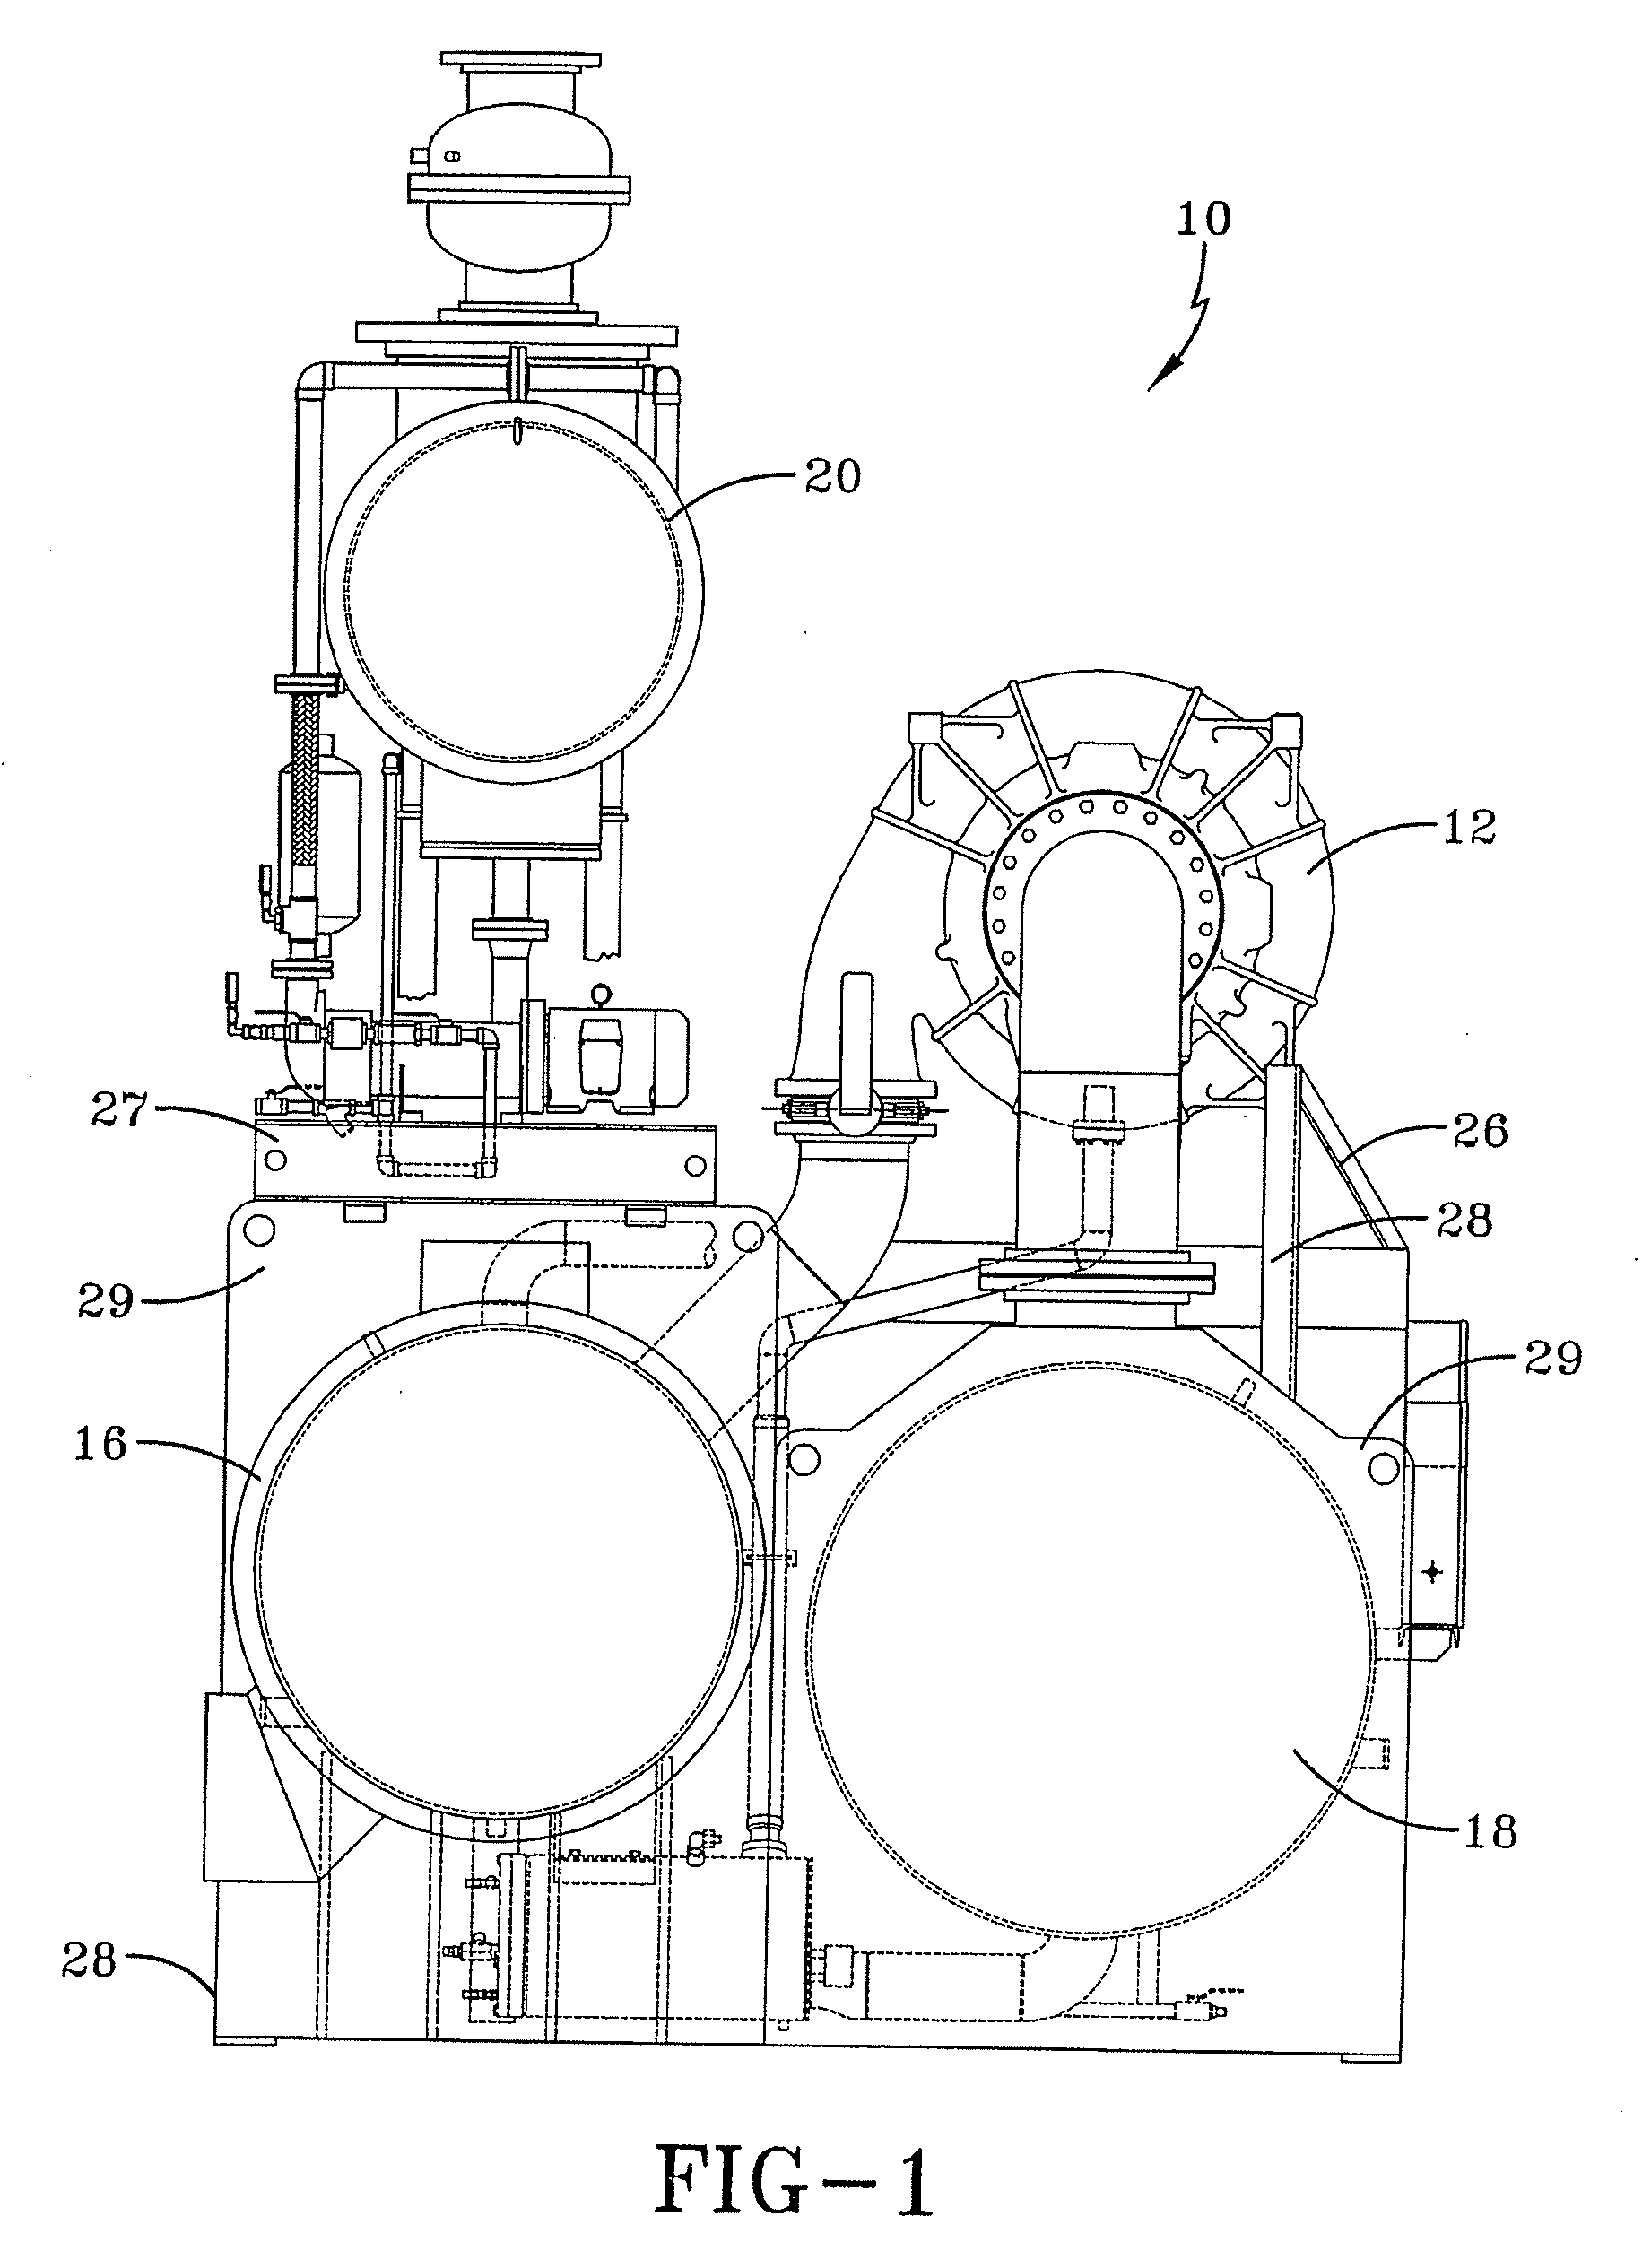 Automated inlet steam supply valve controls for a steam turbine powered chiller unit